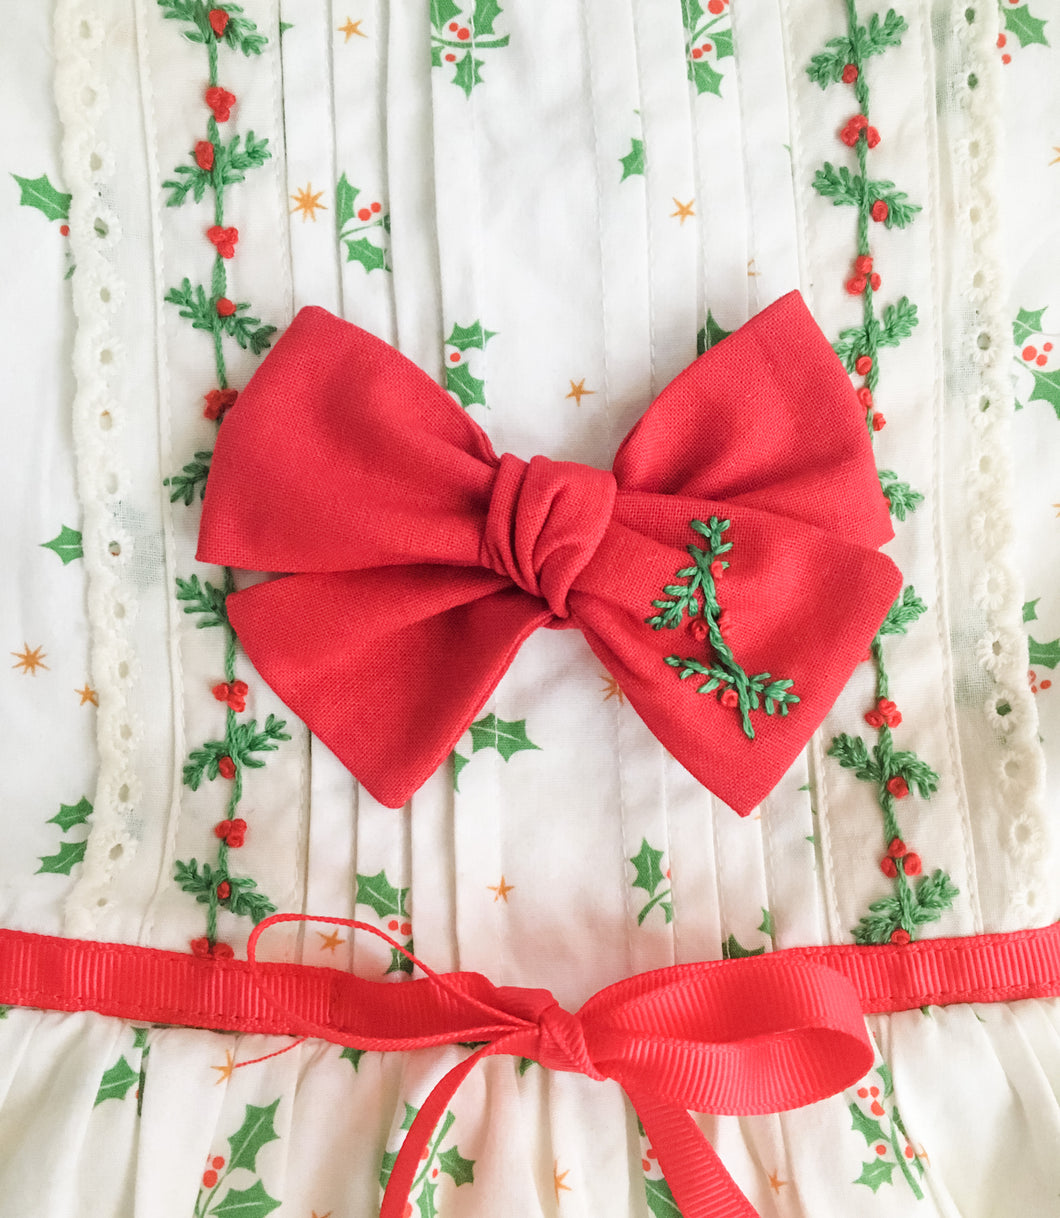 Holly Berry Embroidered Handtied Bow